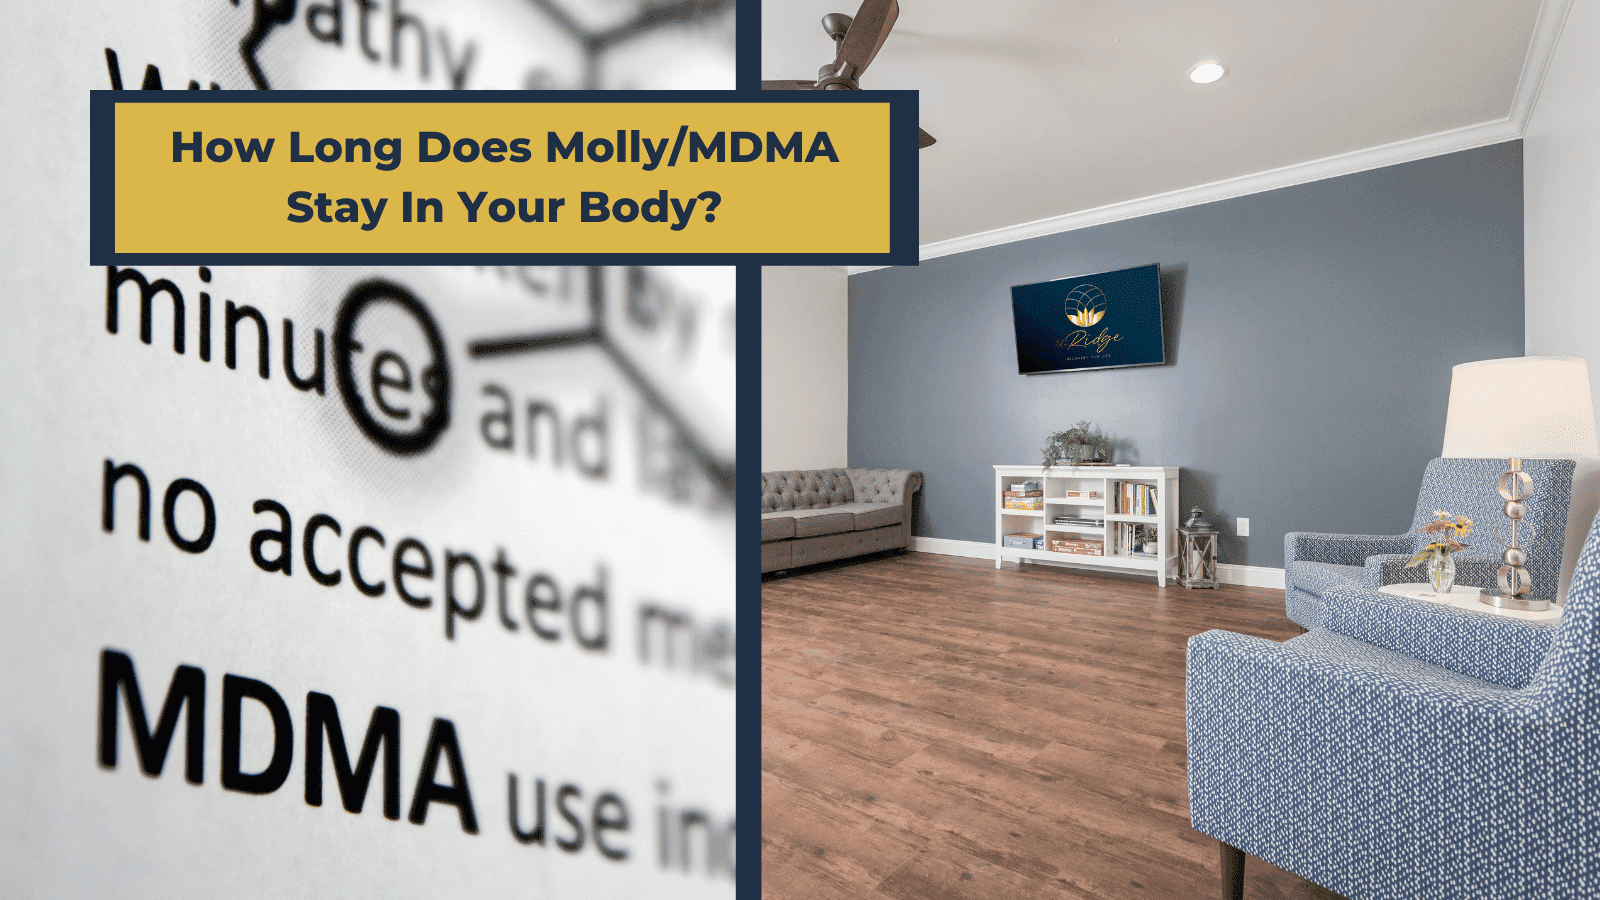 How Long Does Molly/MDMA Stay In Your Body?